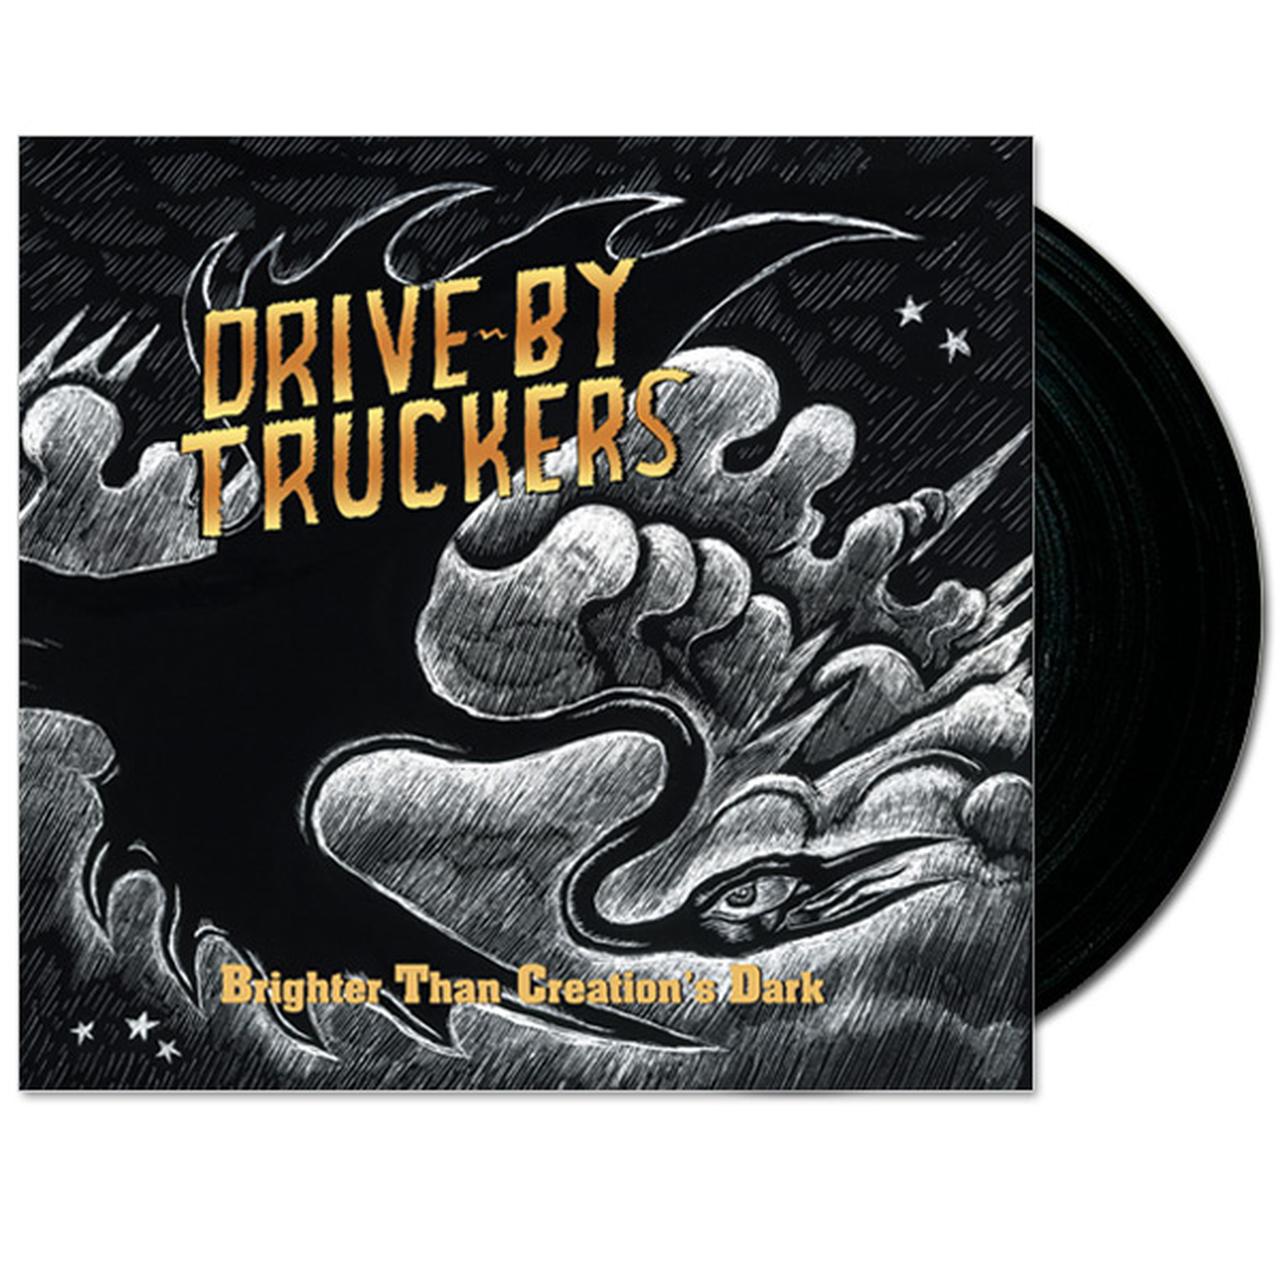 2LP - Drive By Truckers - Brighter Than Creation's Dark